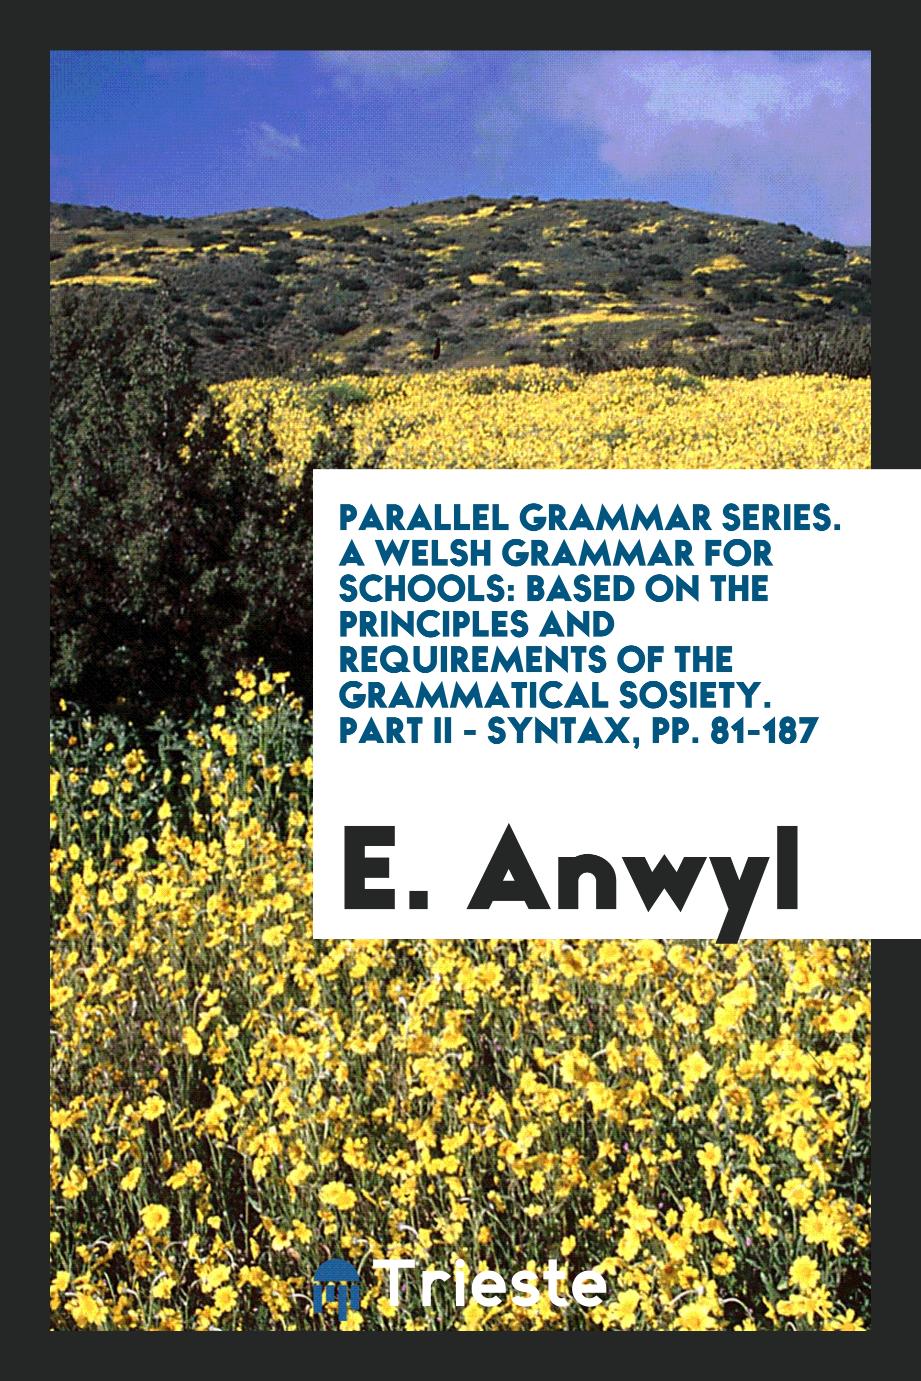 Parallel Grammar Series. A Welsh Grammar for Schools: Based on the Principles and Requirements of the Grammatical Sosiety. Part II - Syntax, pp. 81-187